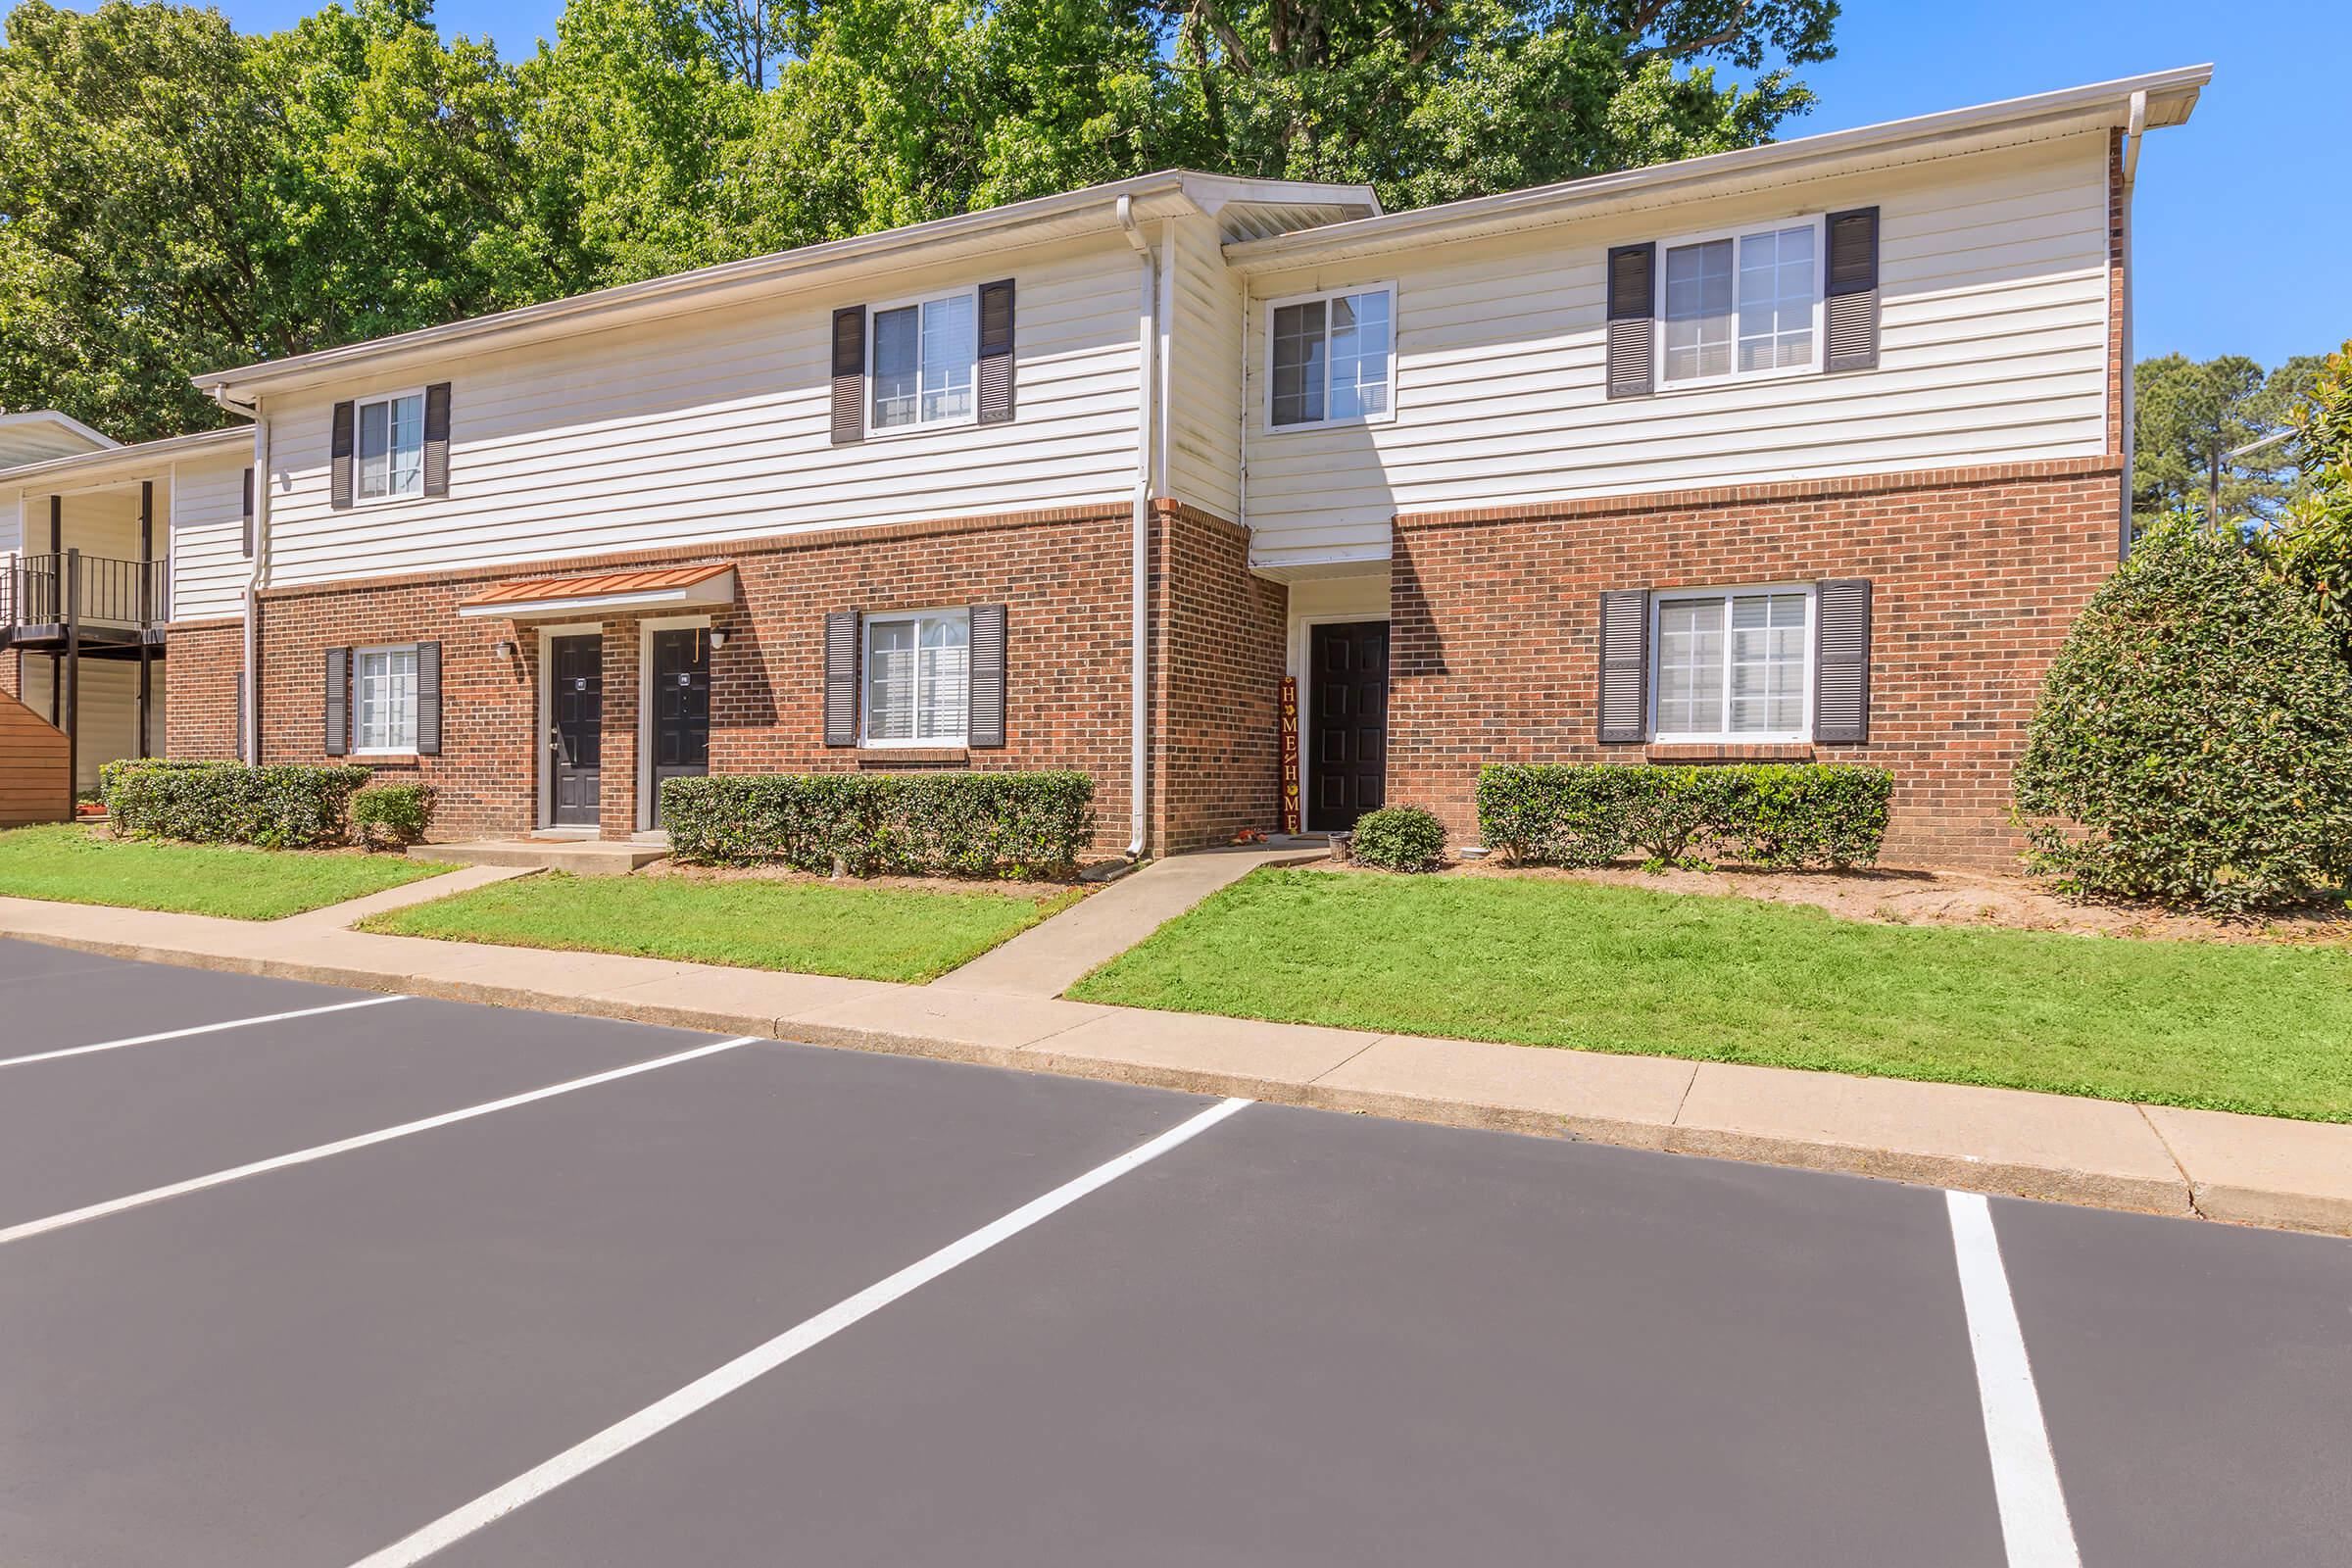 ONE, TWO AND THREE BEDROOM APARTMENTS FOR RENT IN GREENVILLE, NC